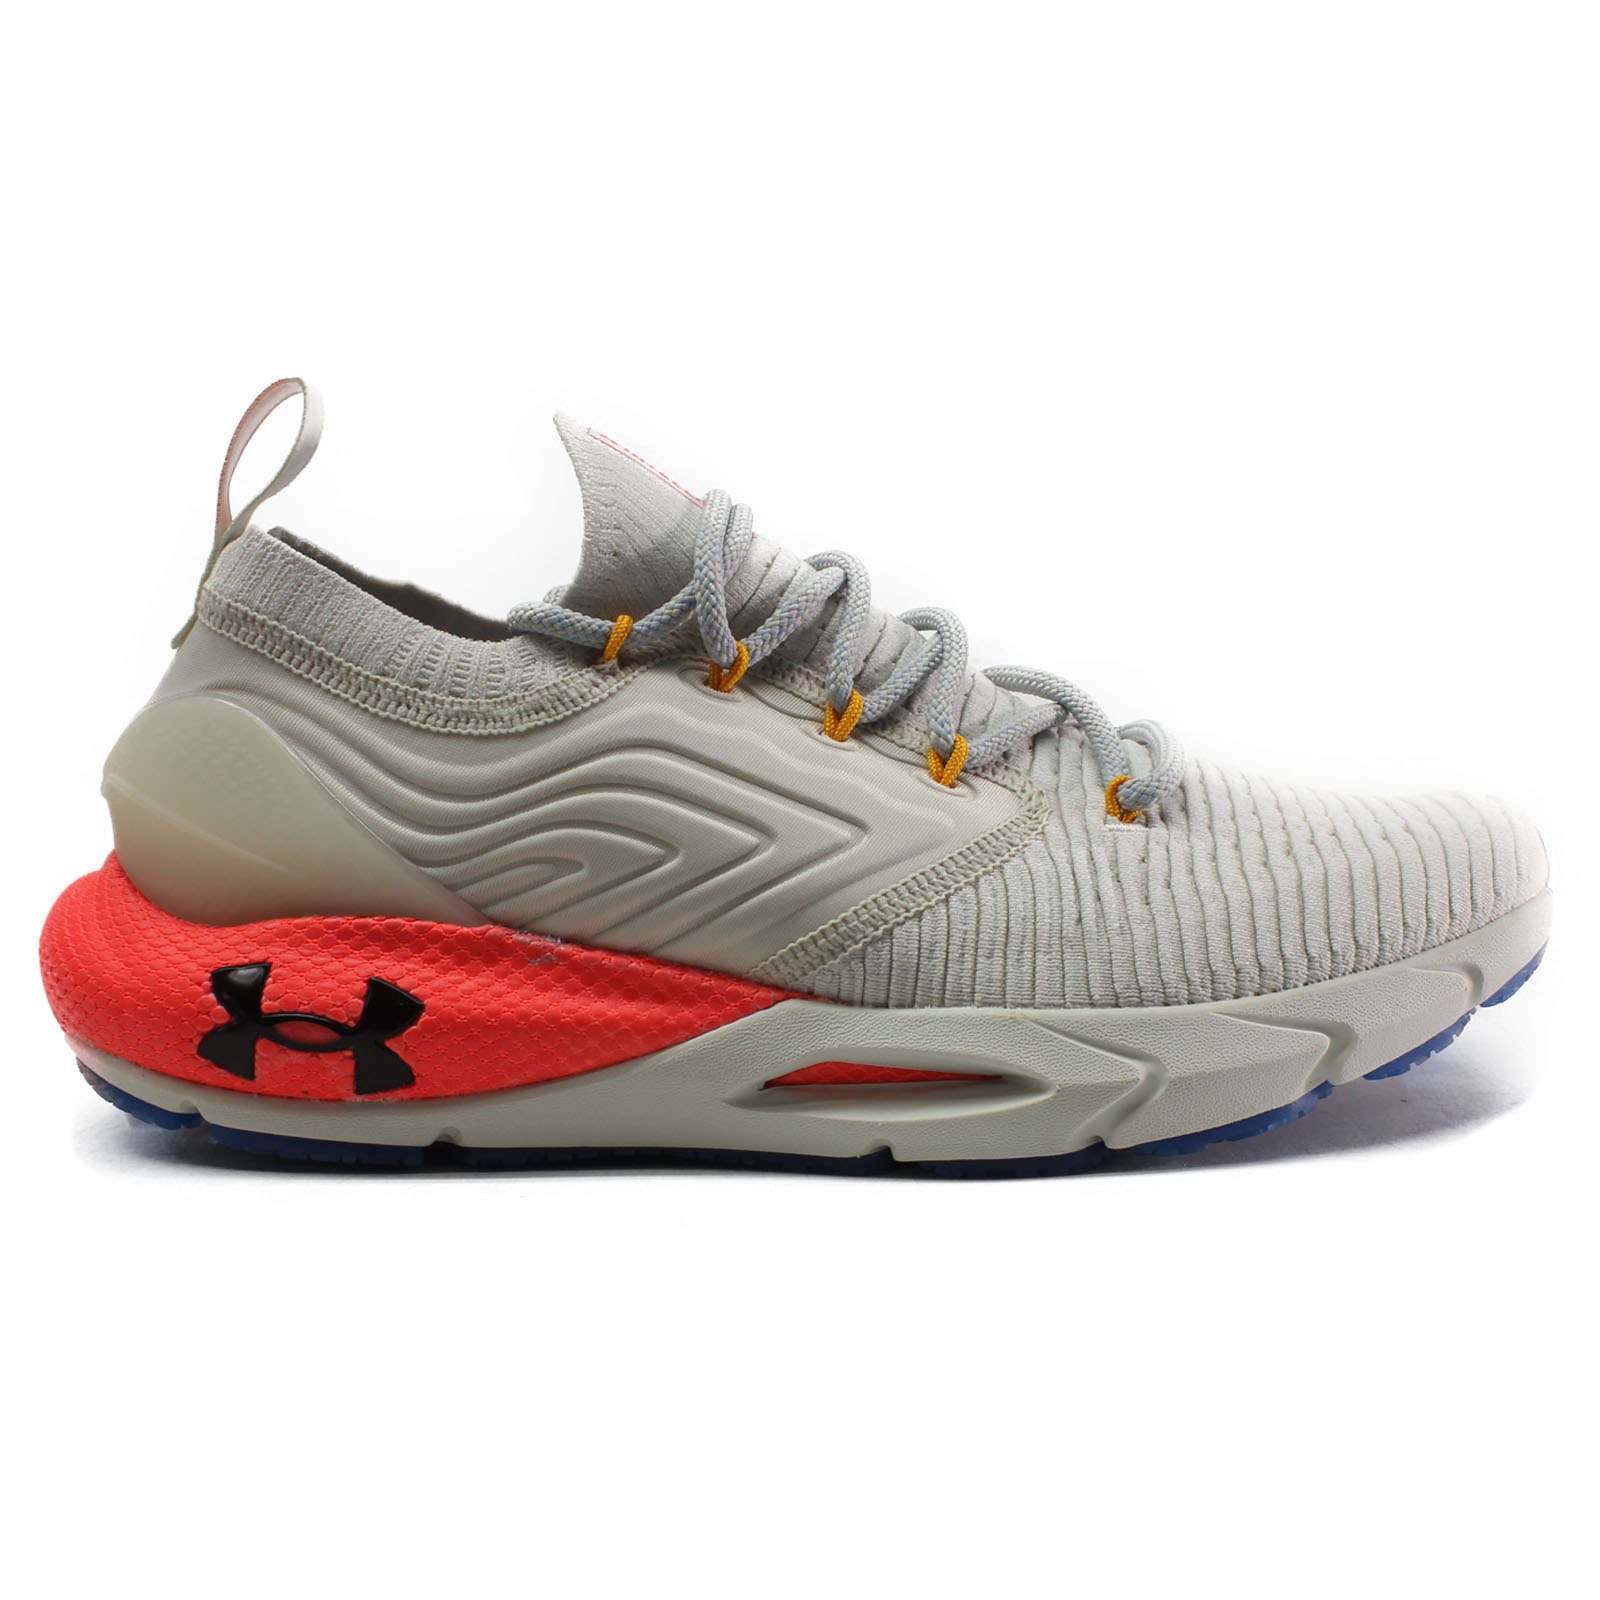 Under Armour HOVR Phantom 2 INKNT ST Synthetic Textile Women's Low-Top Trainers#color_brown red